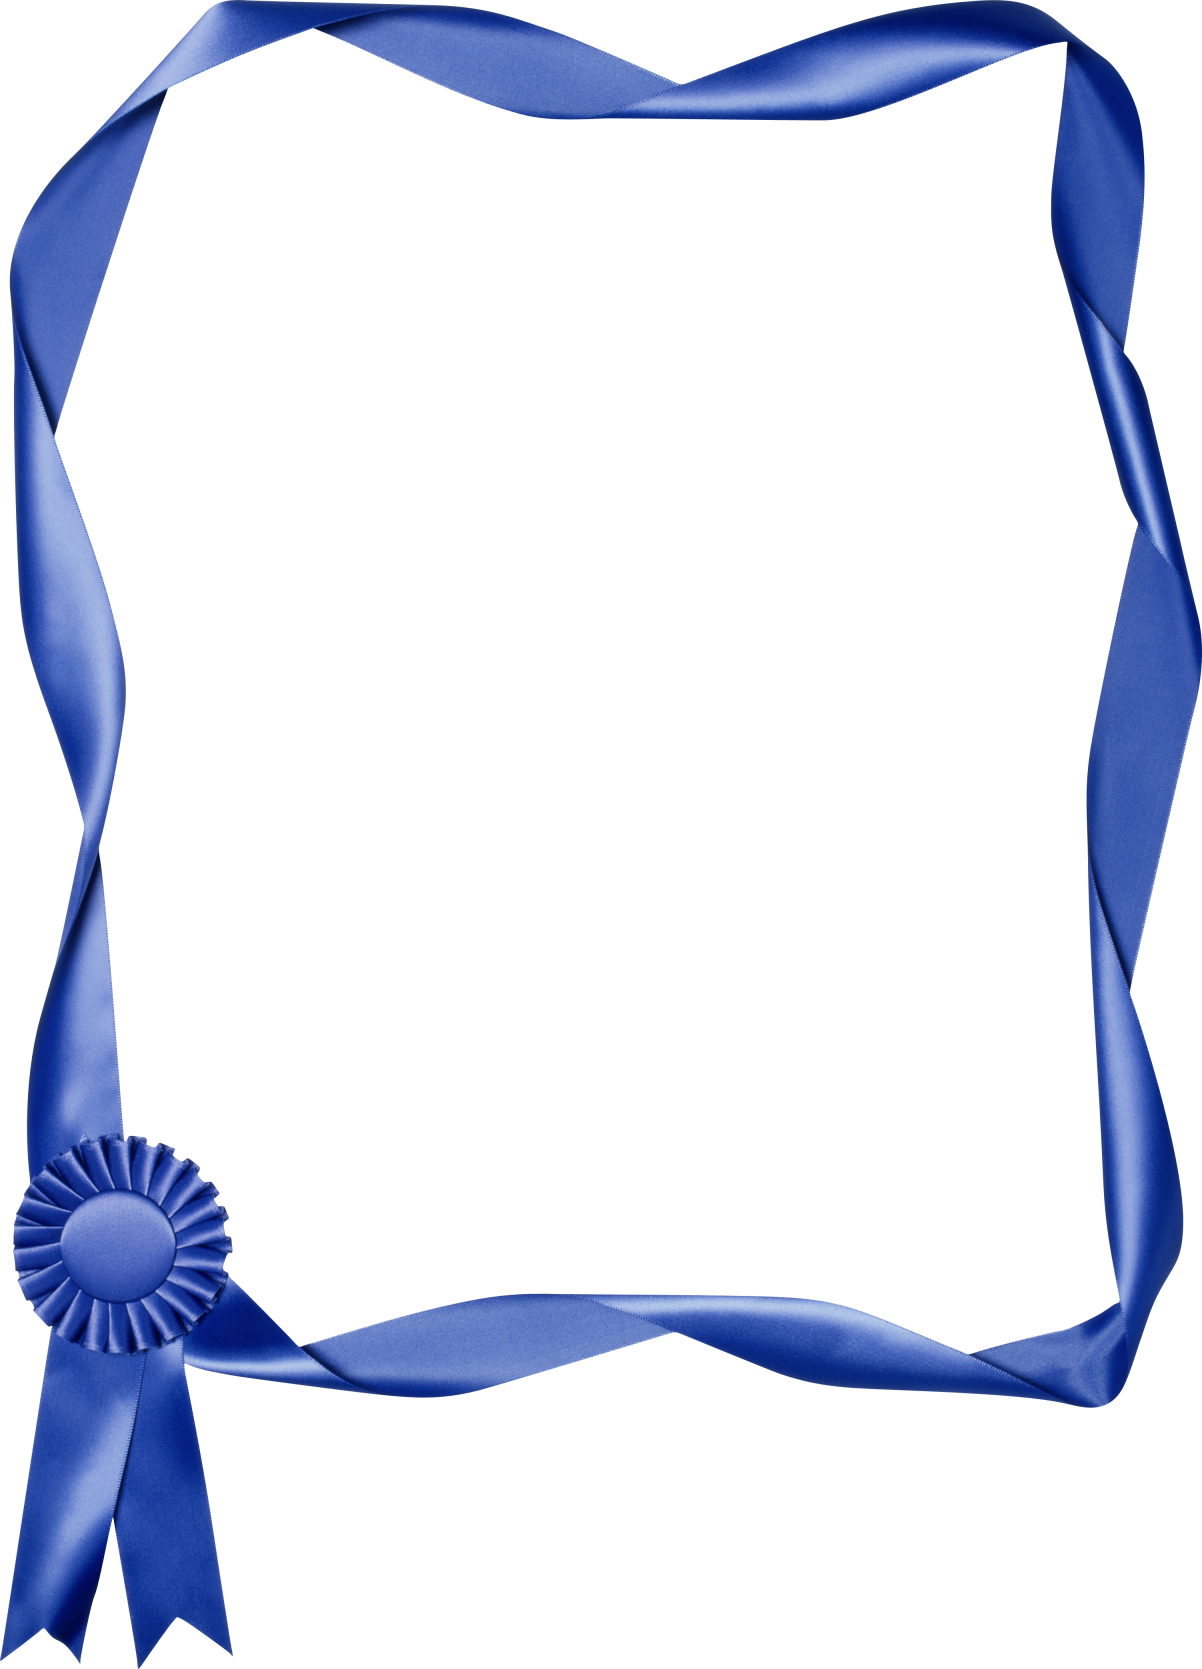 Free Borders And Border Clipart Print And Website Borders - Blue Borders And Frames With Ribbon (1202x1669)